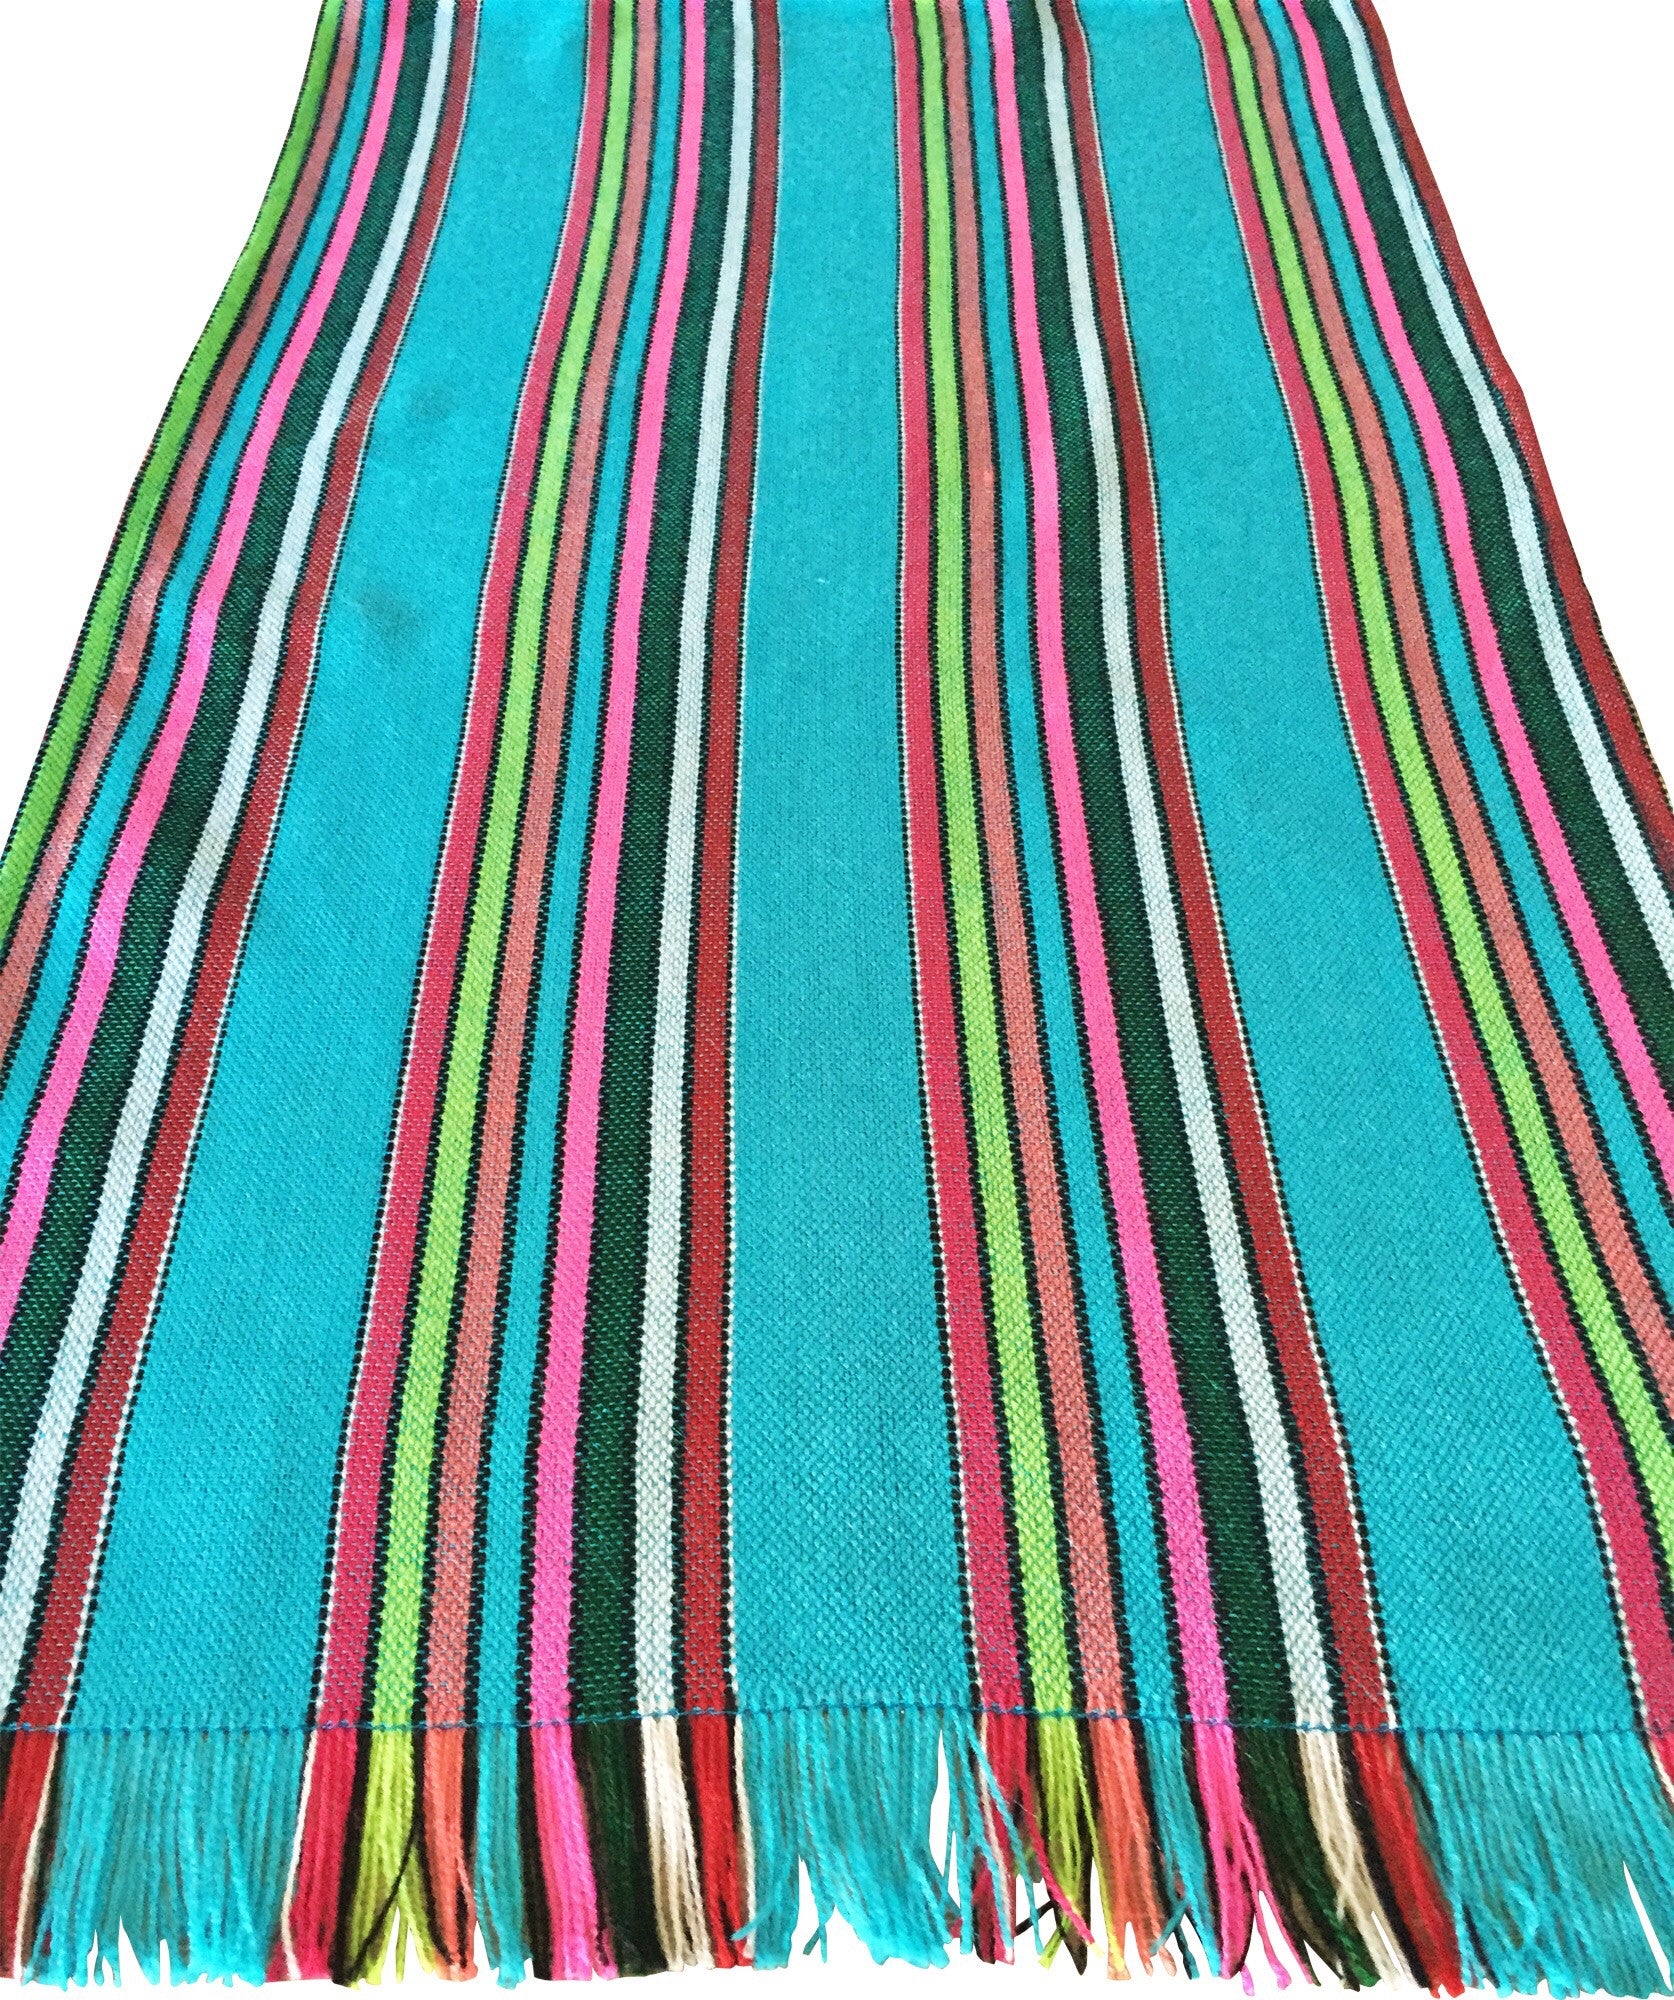 Mexican Fabric Table Runner Colorful Teal Stripes - MesaChic - 1